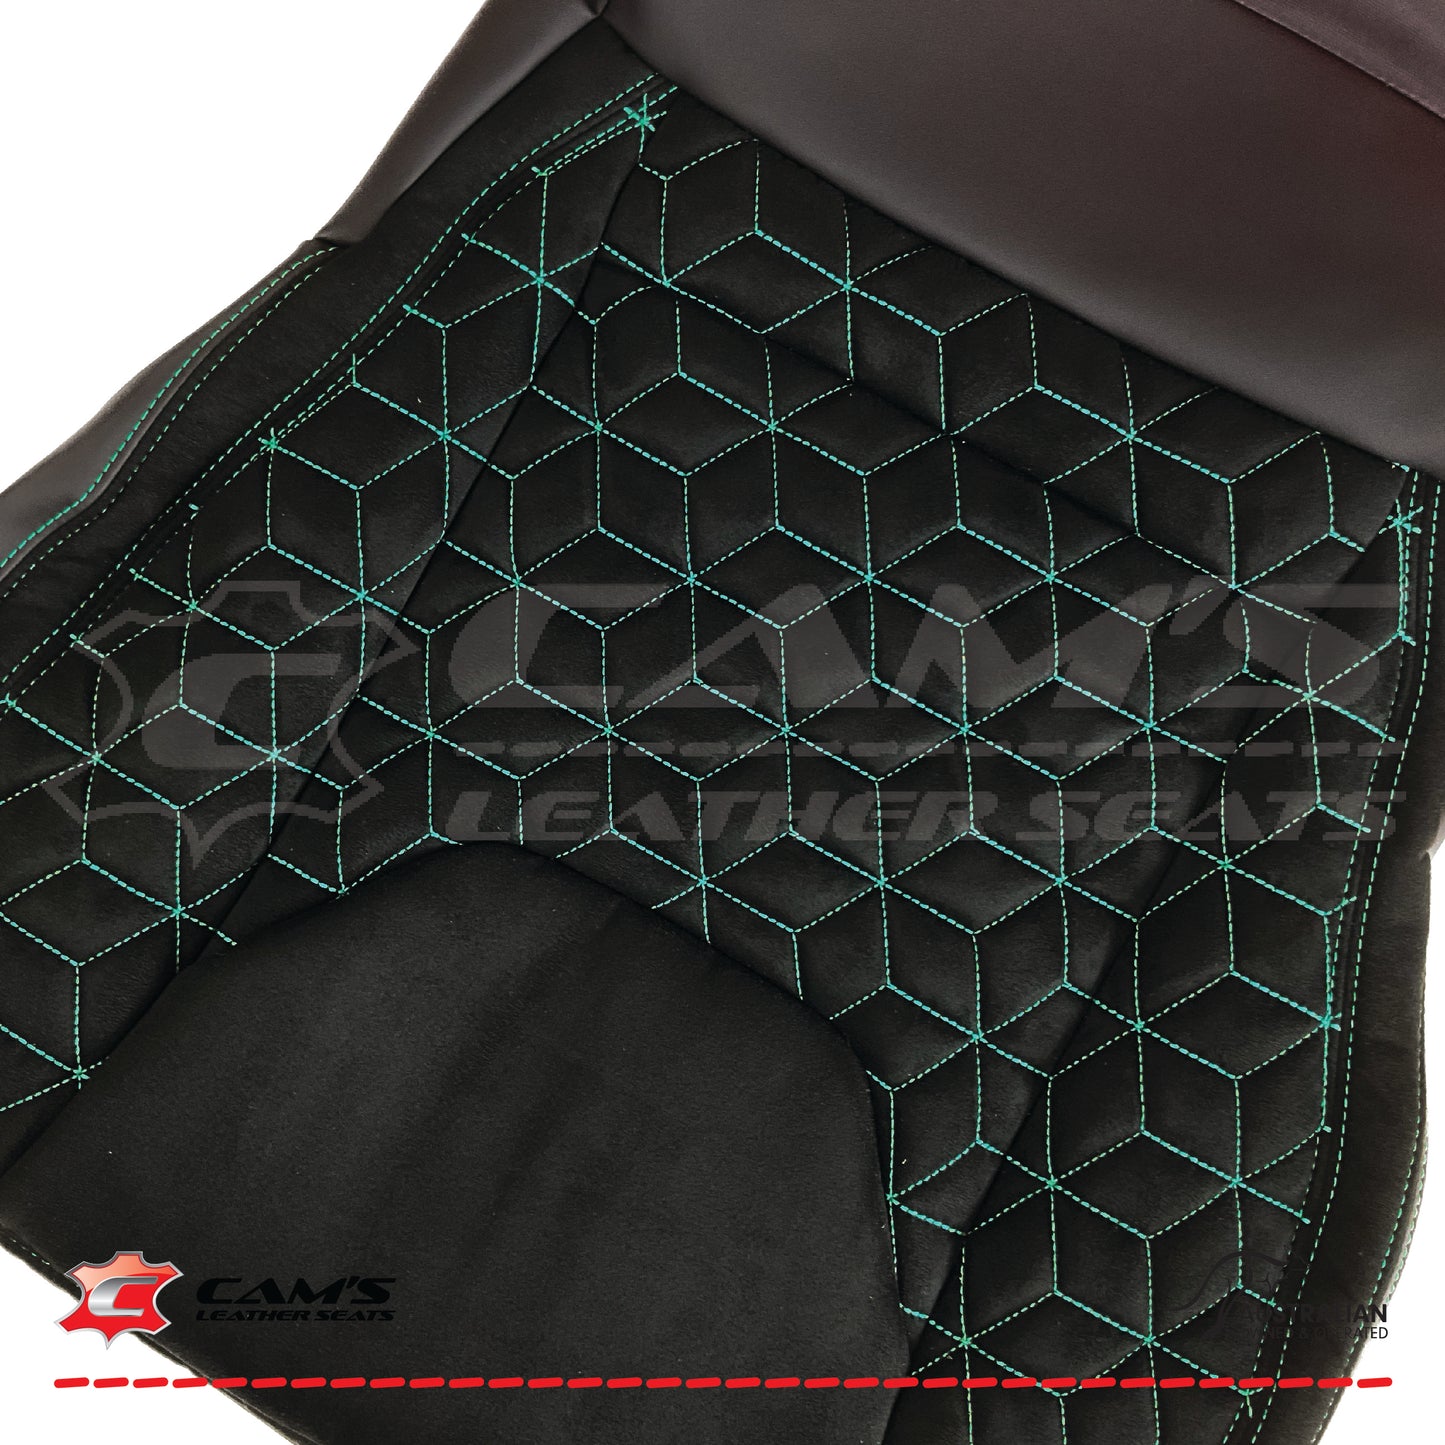 LEATHER SEATS TRIM KIT FOR HOLDEN HSV VF GTS 2 SEATS BLACK SUEDE WITH TEAL STITCH